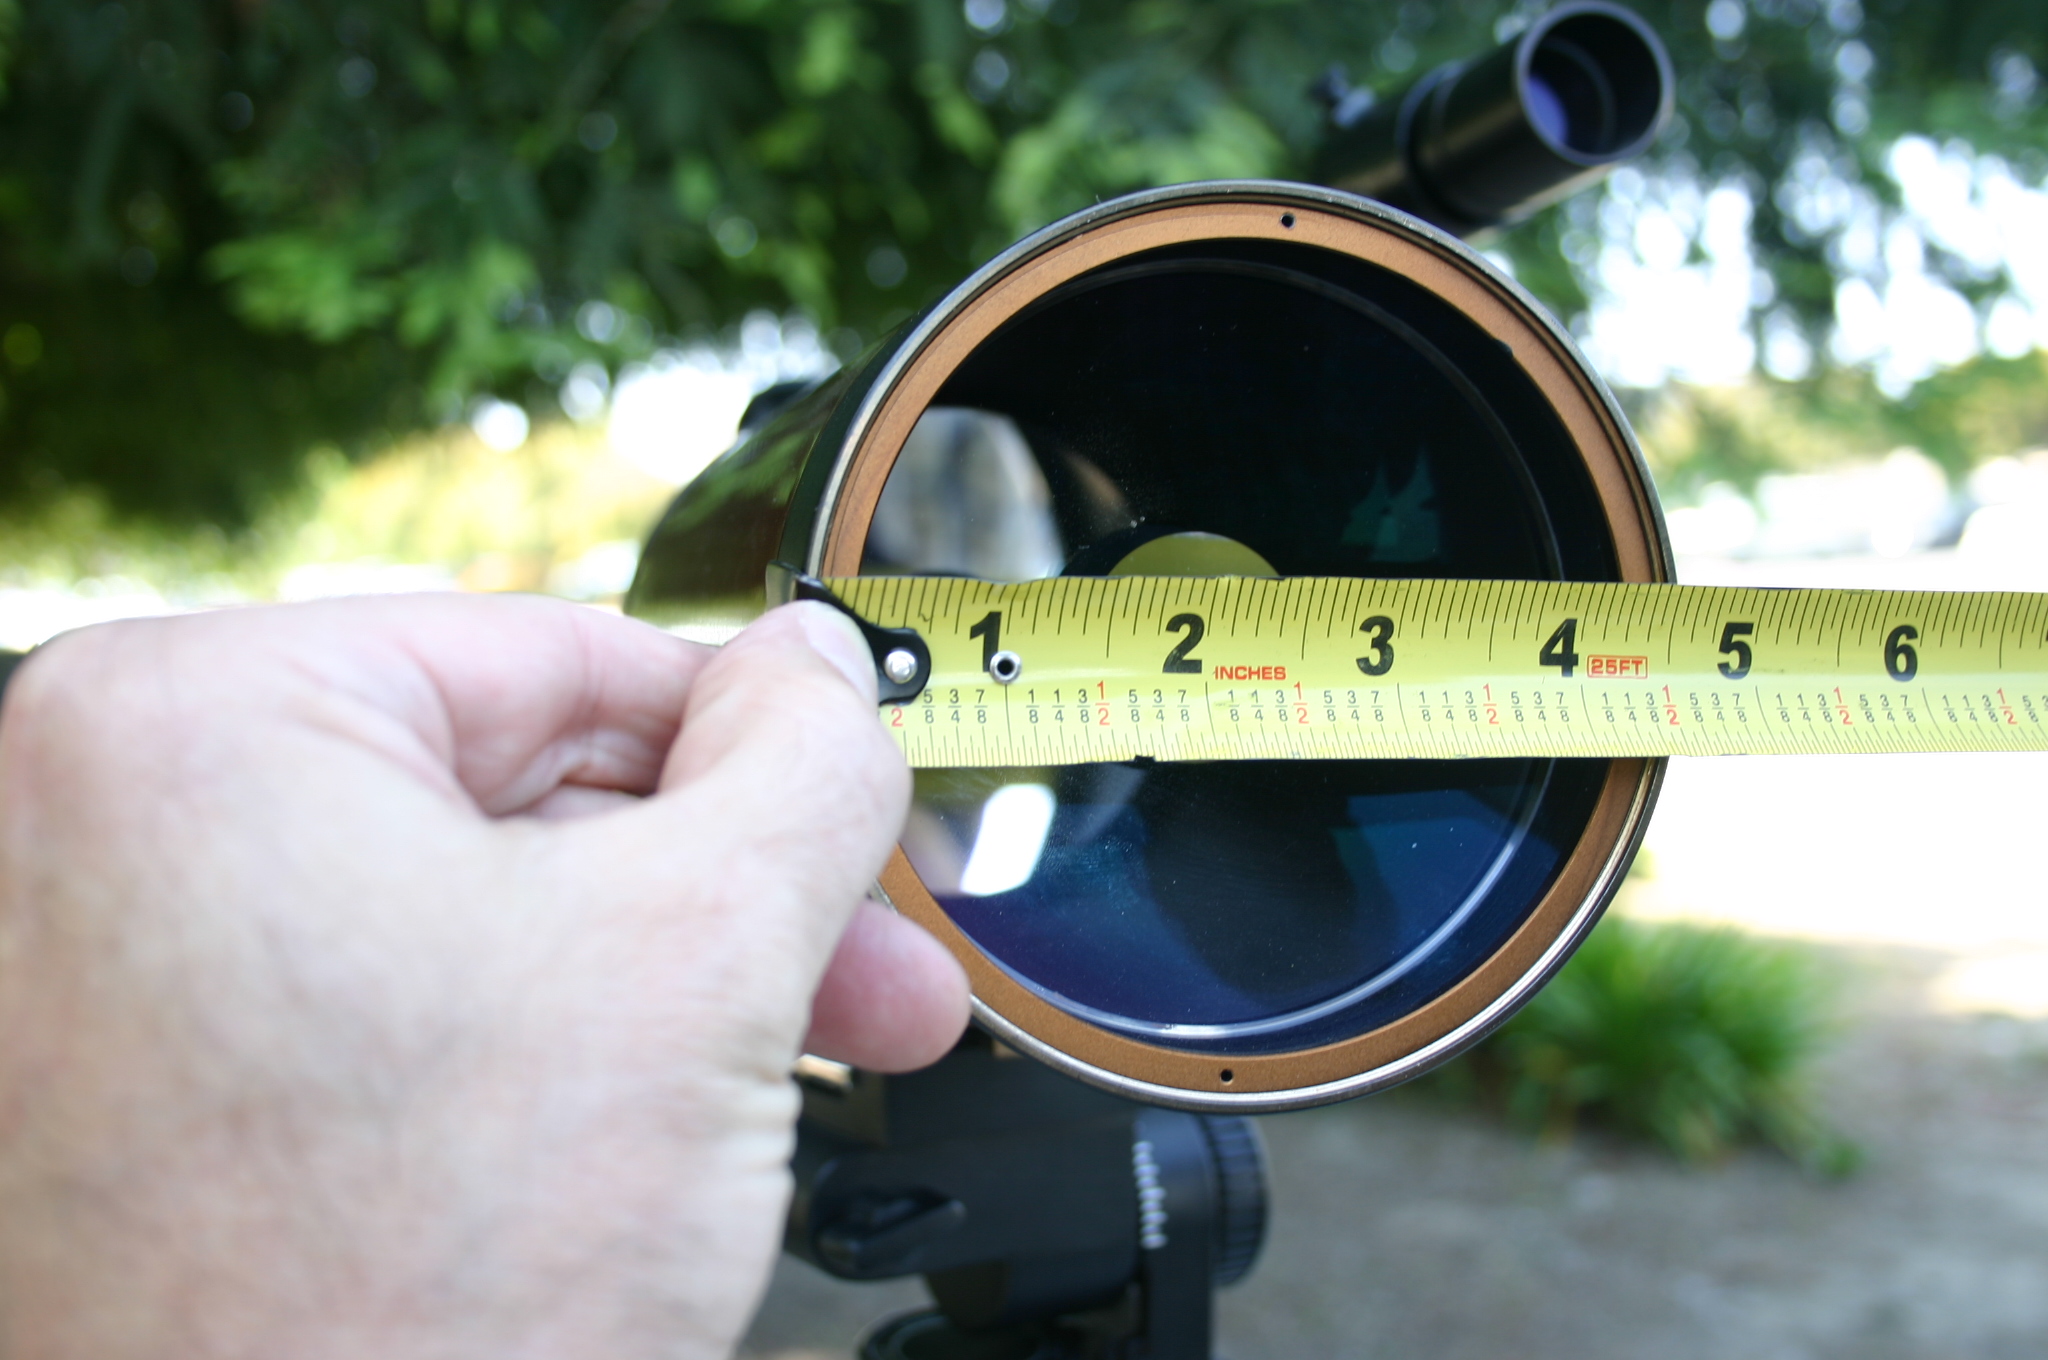 Measure the maximum outside (OD) of the front end of your finder scope